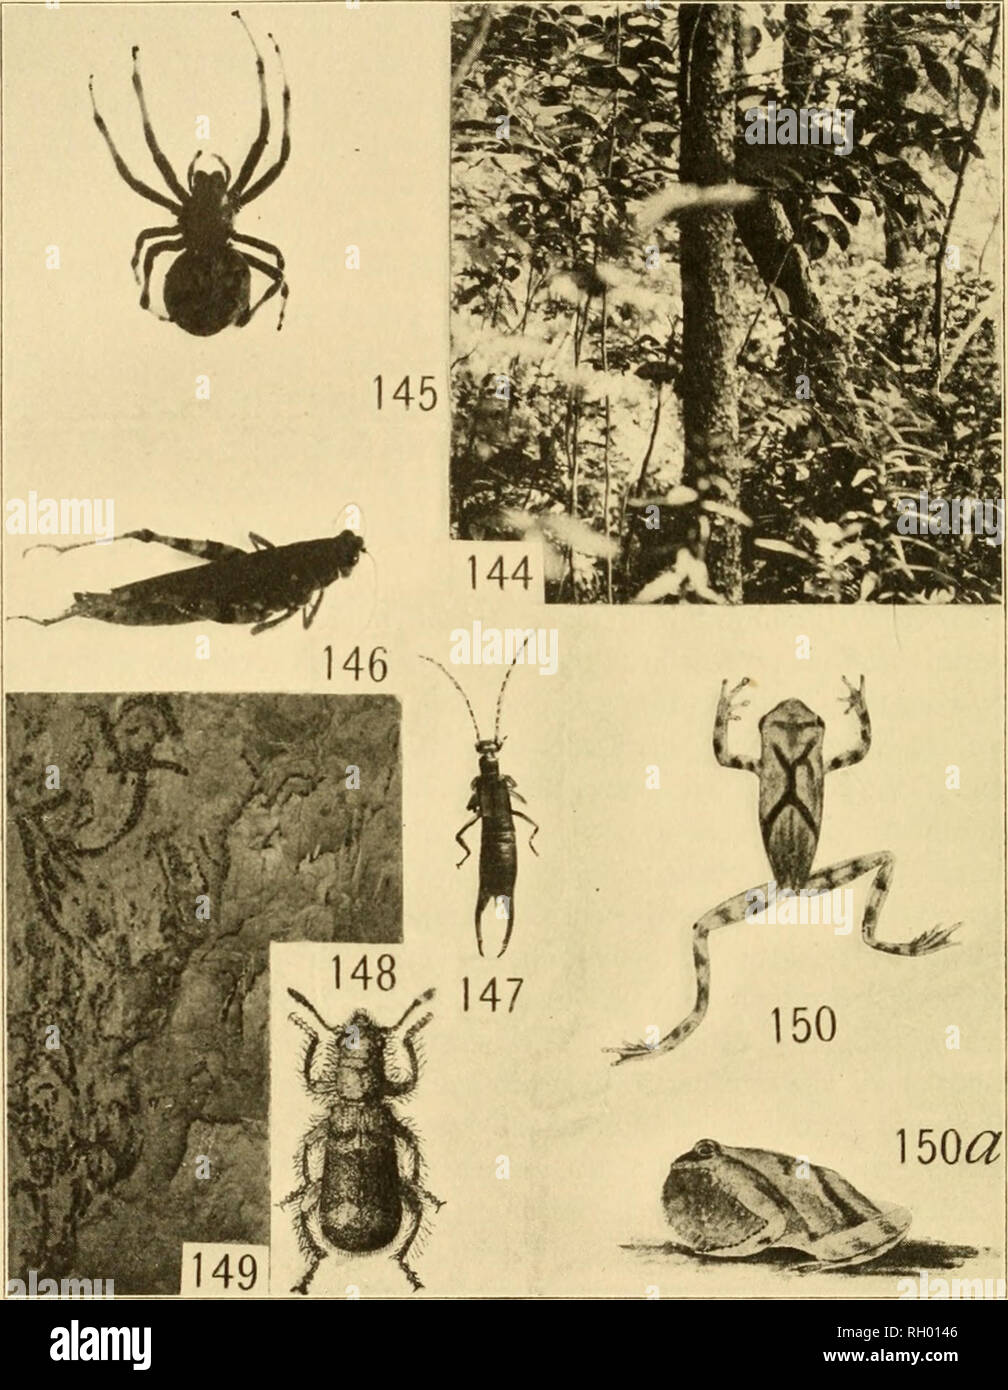 . Bulletin. Geography. 194 WET FOREST COMMUNITIES. Representatives of the Tamarack Swamp Community Fig. 144.—View in the dense vegetation of the tamarack swamp. Fig. 145.—Female orb-weaver {Epeira gigas); about natural size. Fig. 146.—The brindled locust (Melanoplns punclulatus); natural size. Fig. 147.—Axi eSirviig {Apterygida aculeata); natural size. Fig. 148.—An engraver beetle destroyer (Cleridae, Thanasimus dubius); 3 times natural size (from Blatchley after Wolcott). Fig. 149.—The bark of the tamarack, showing the work of the engraver beetle {Polygraphus rufipennis). Figs, t^o, 150a.—Pic Stock Photo